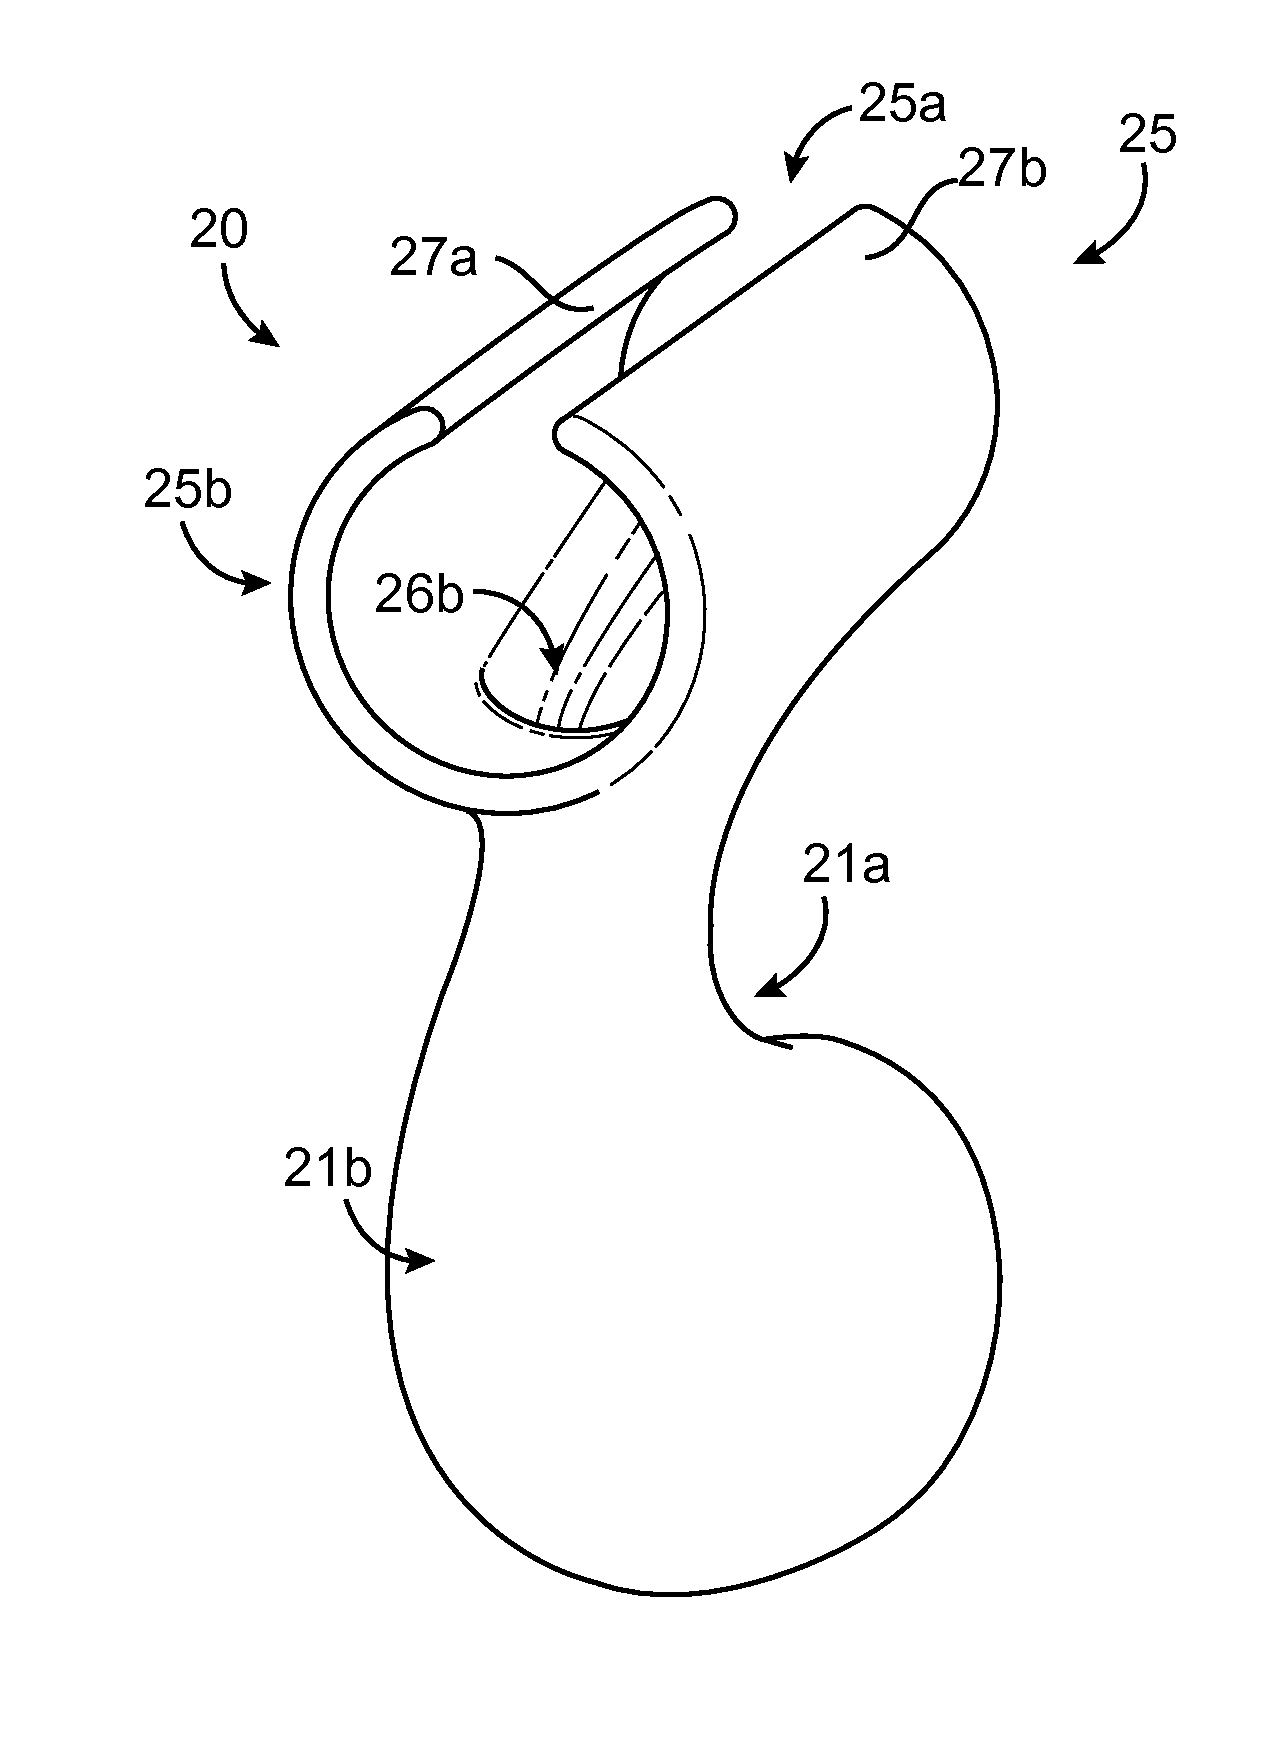 Extravascular devices supporting an arteriovenous fistula